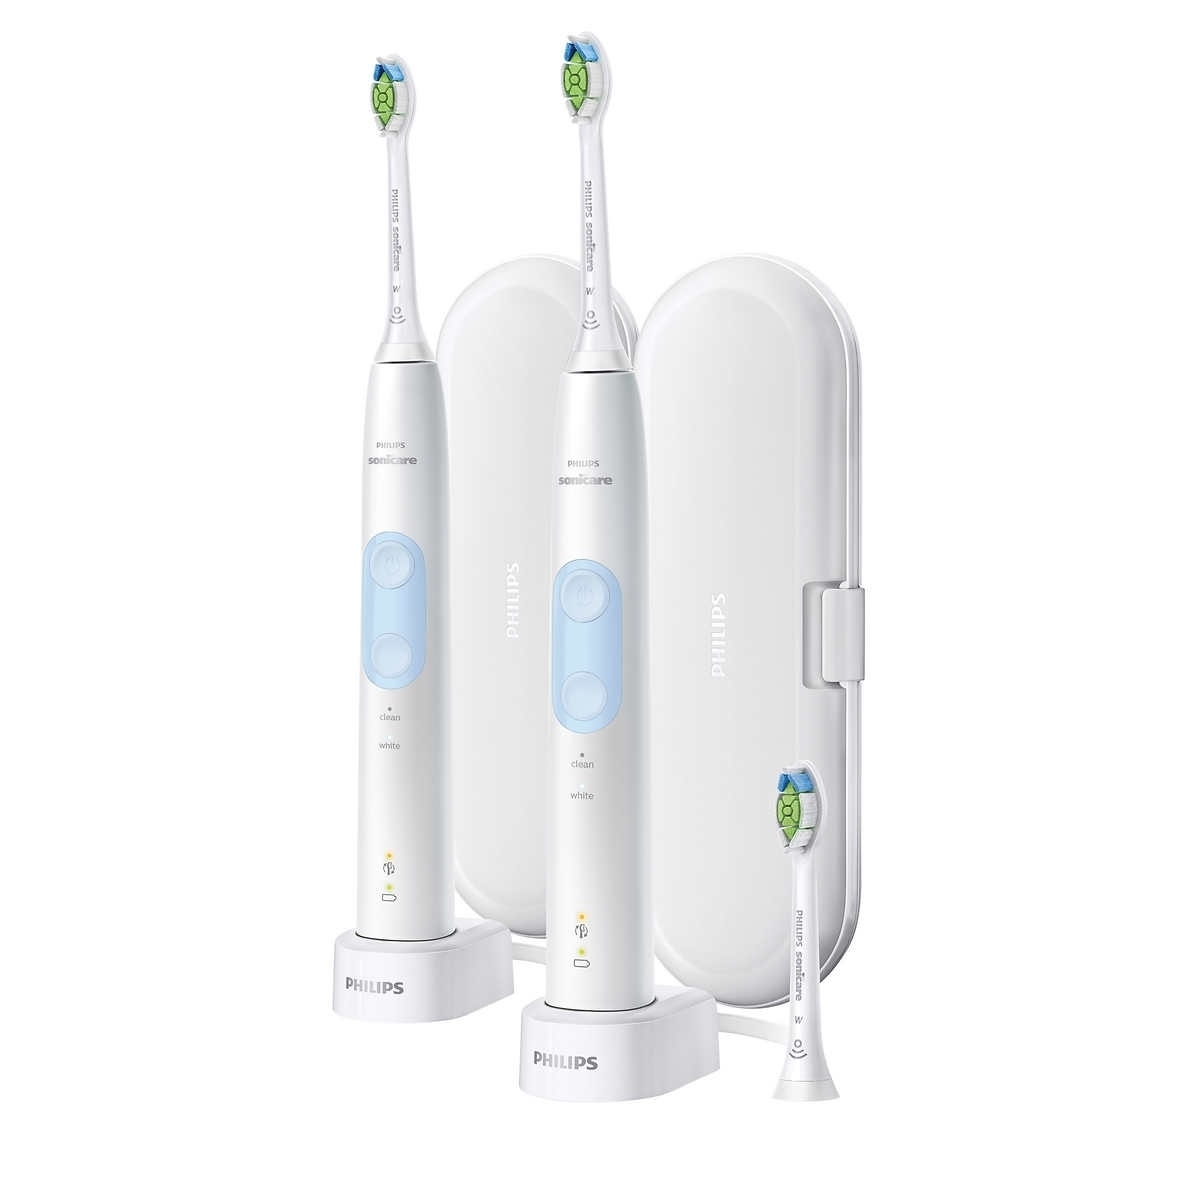 Philips Sonicare Optimal Clean Rechargeable Toothbrush, 2 Pack